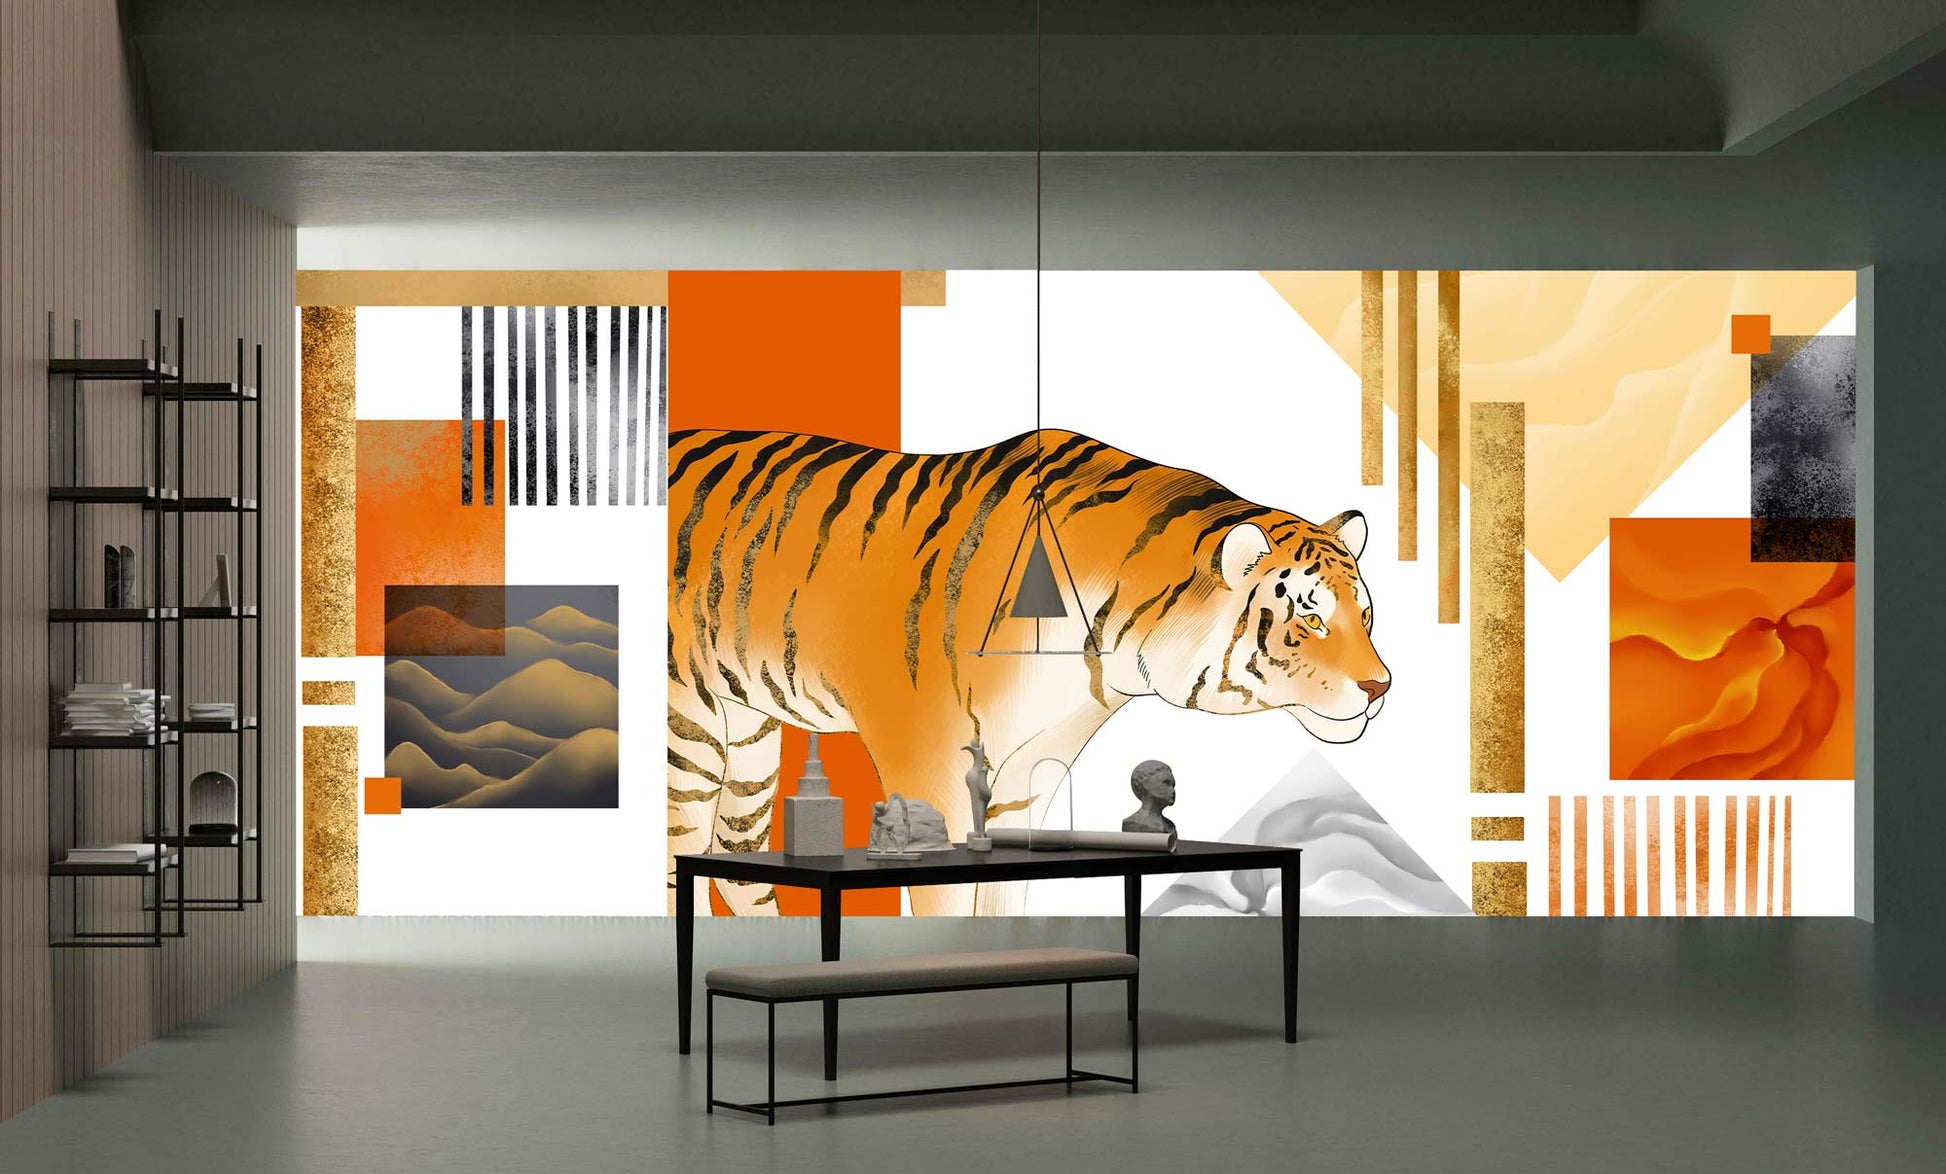 Tiger Animal Wallpaper Mural for Use as a Decoration in the Hallway